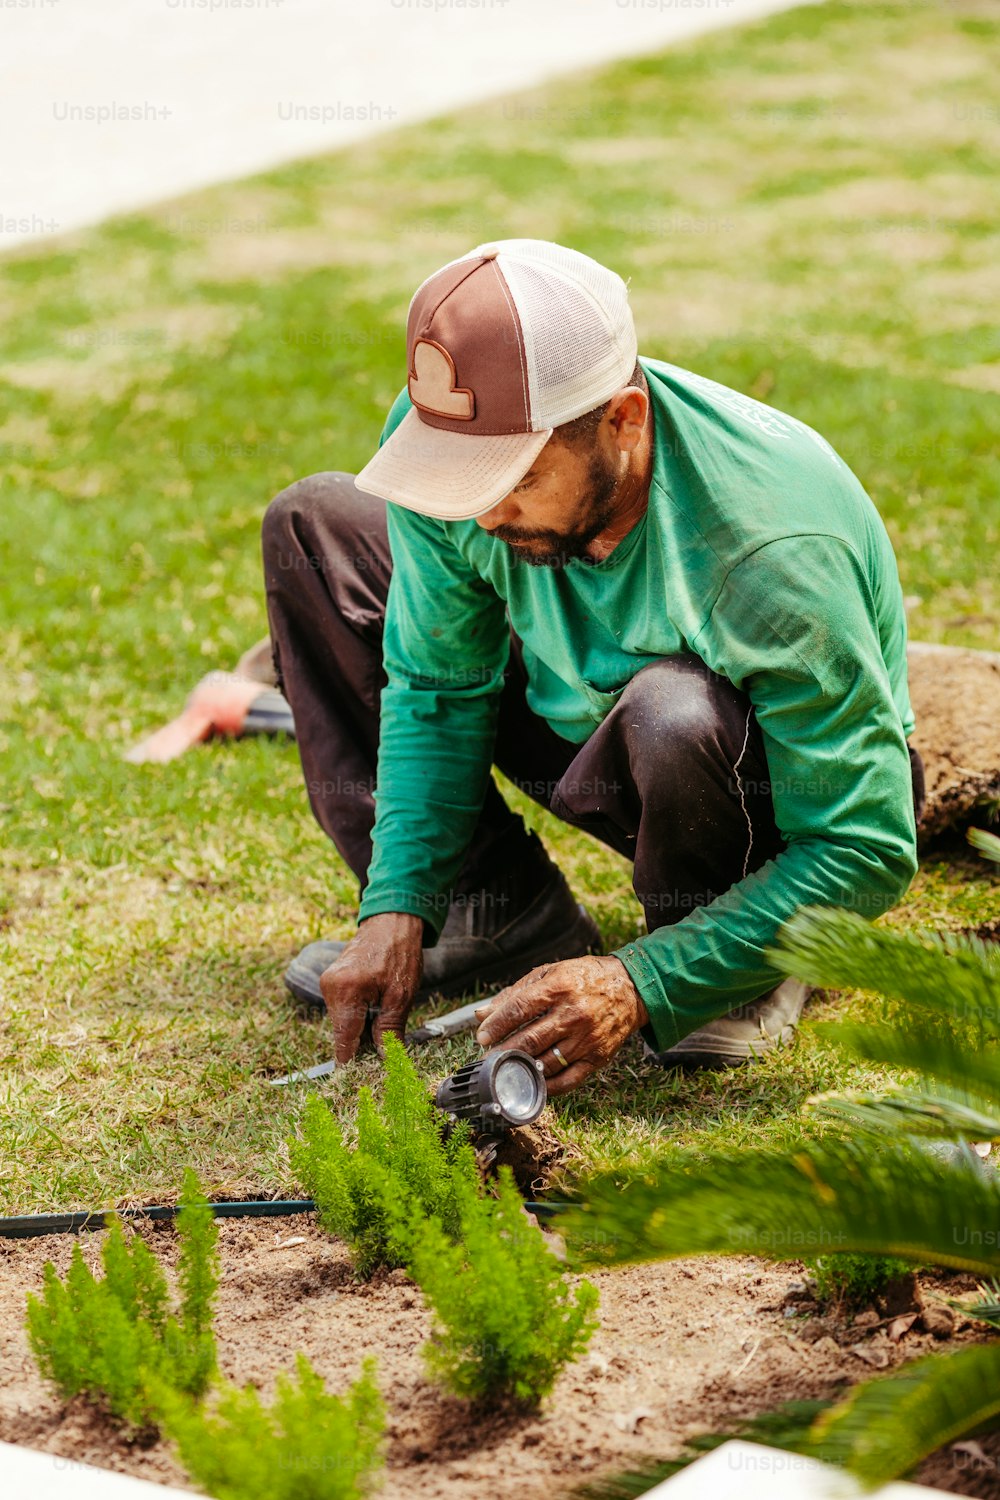 a man in a green shirt and hat working in a garden